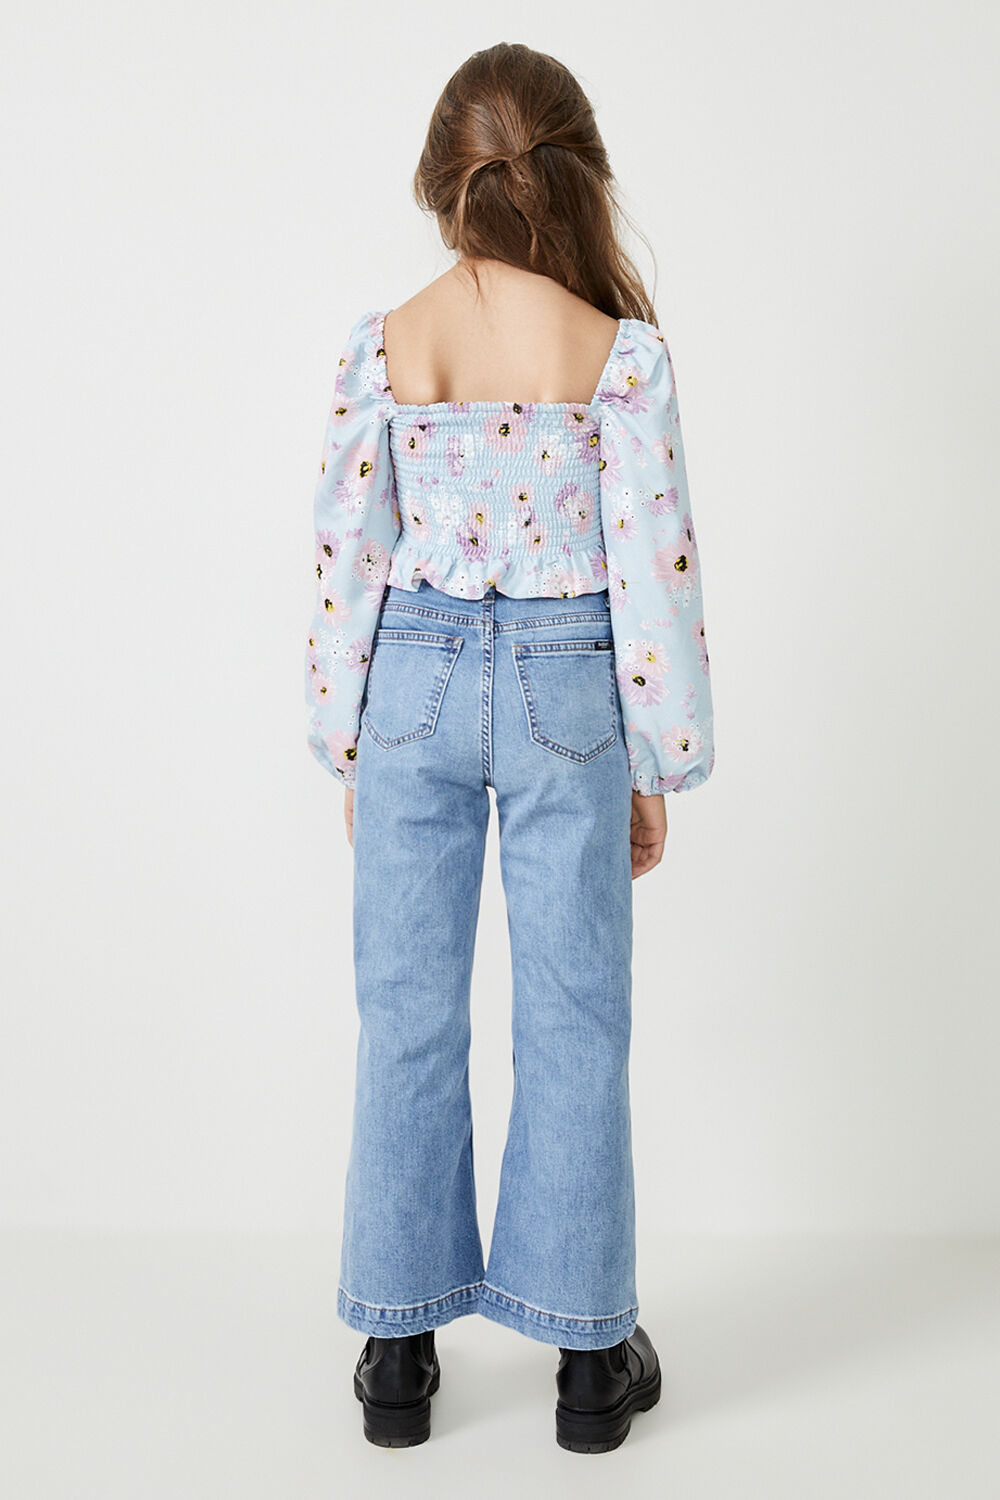 GIRLS ELLA BRODERIE TOP in colour CLEMATIS BLUE